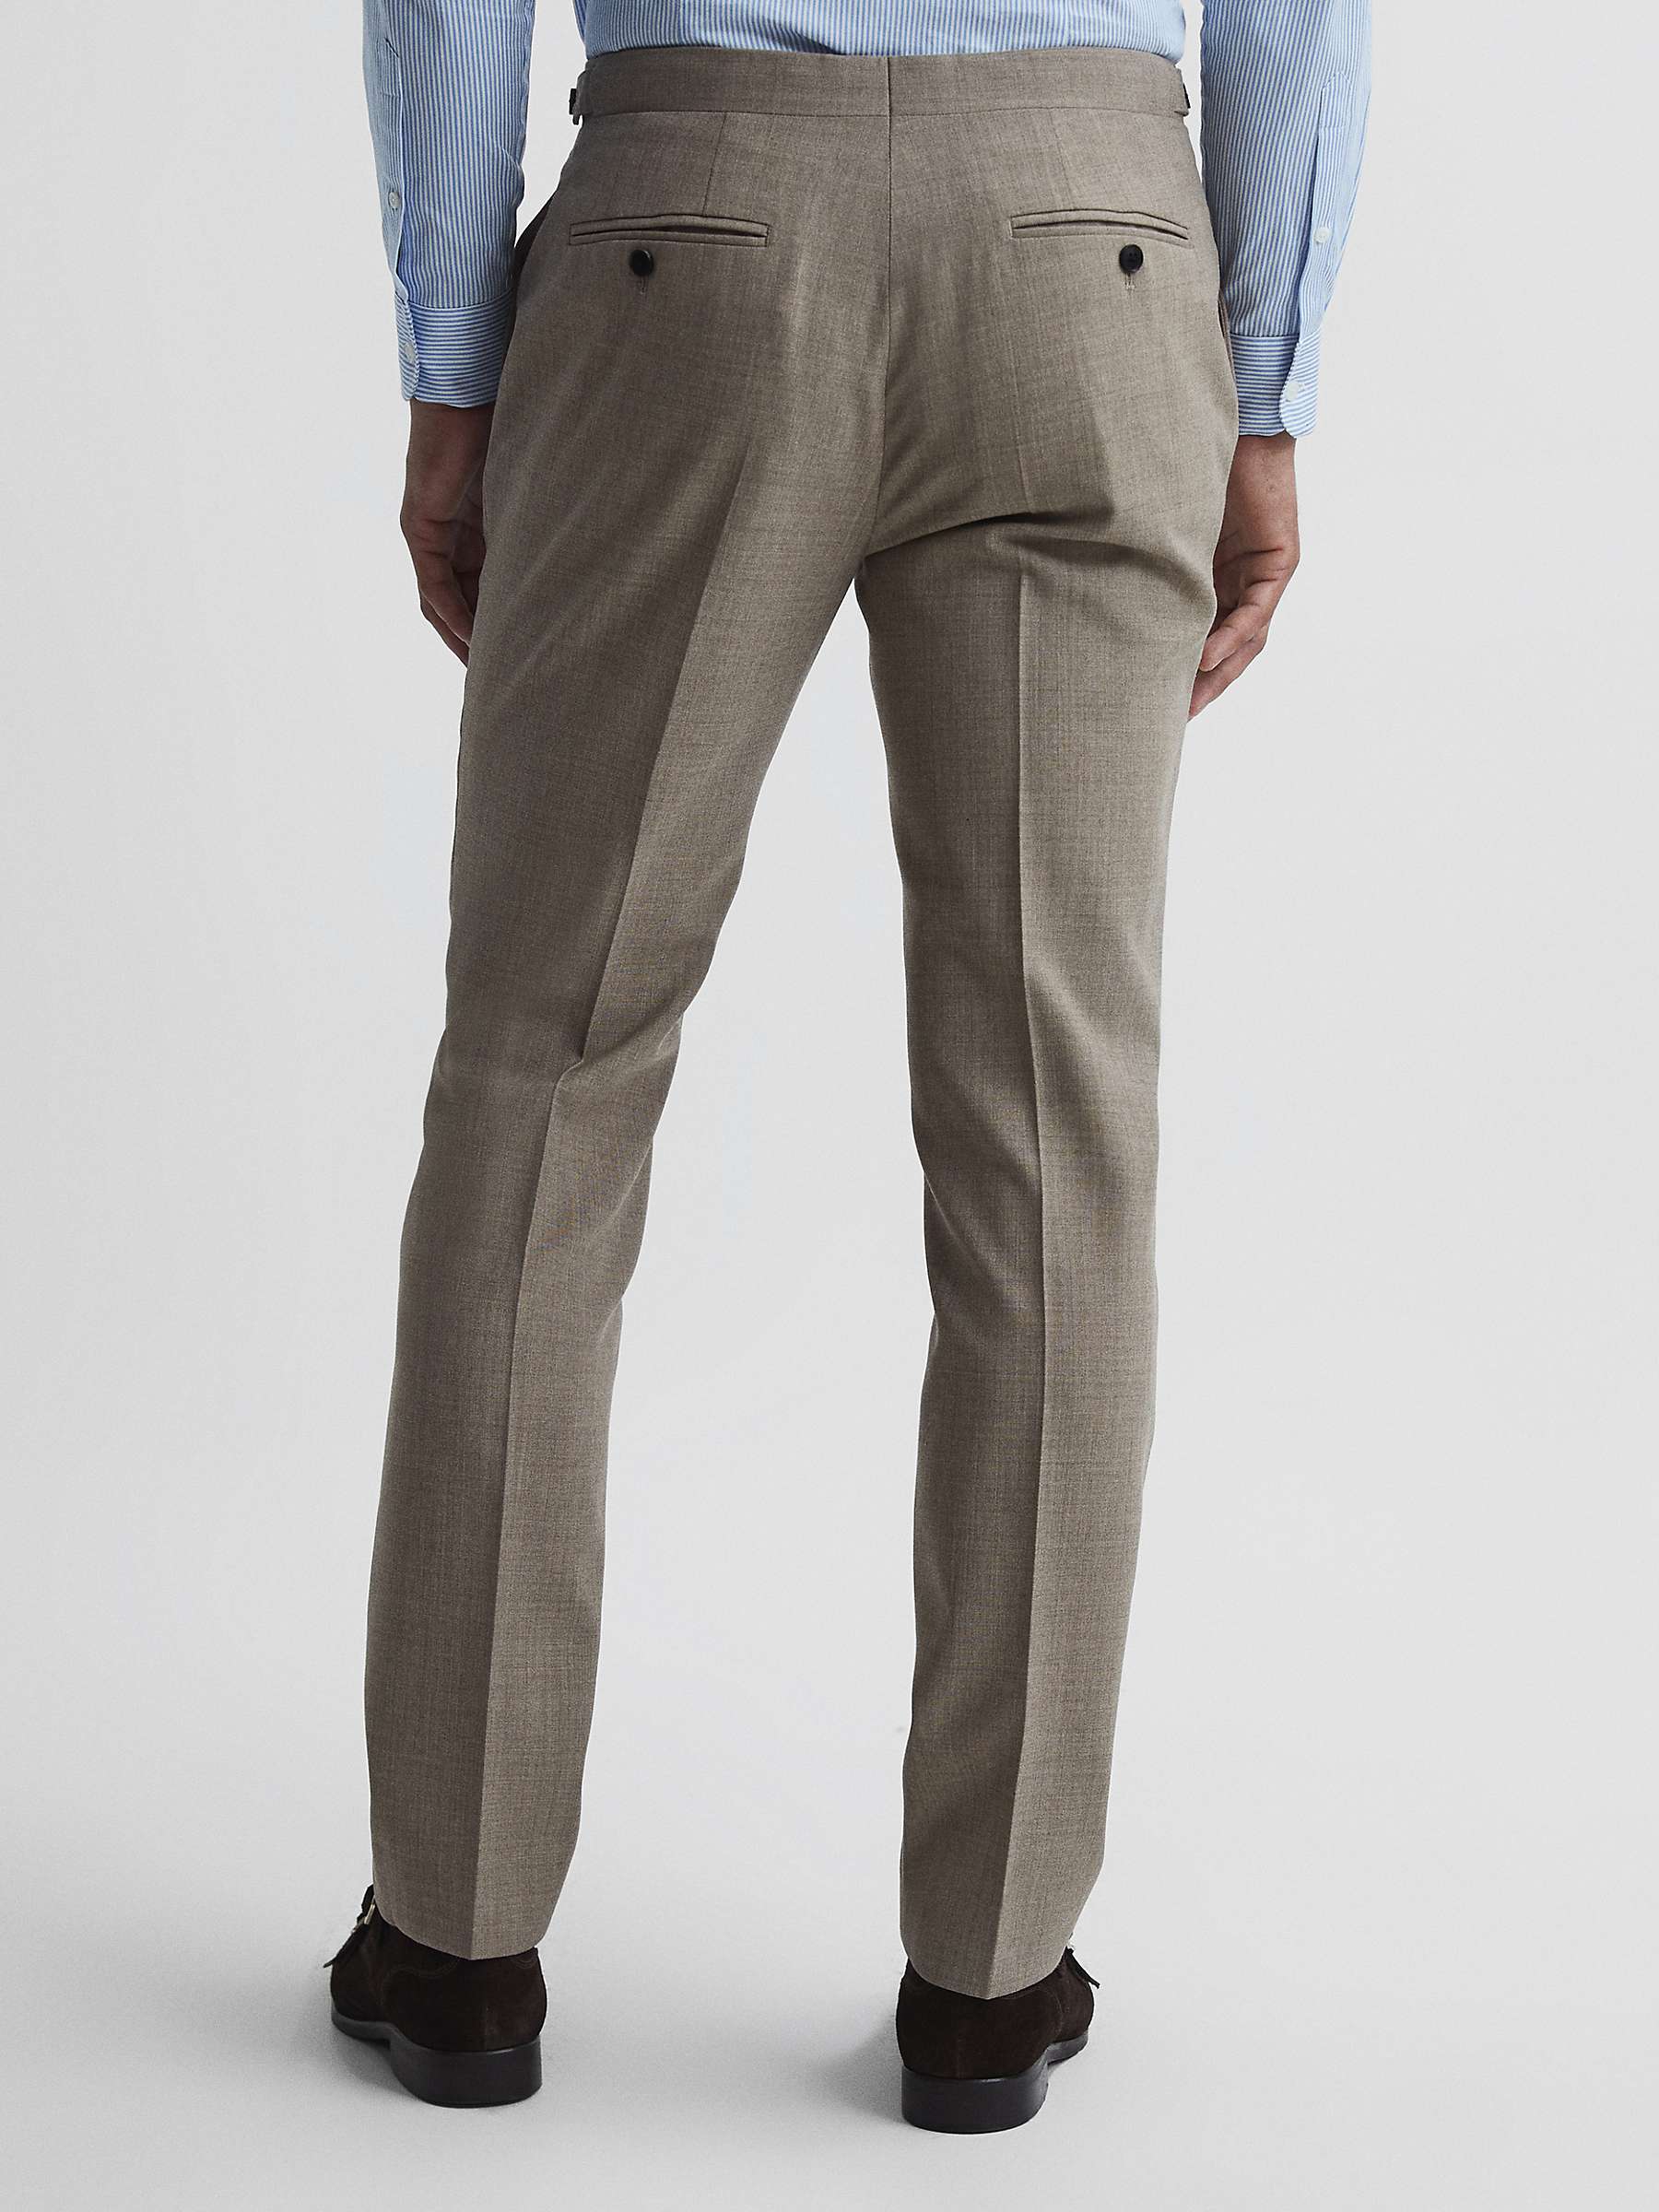 Reiss Rope Wool Suit Trousers, Light Brown at John Lewis & Partners